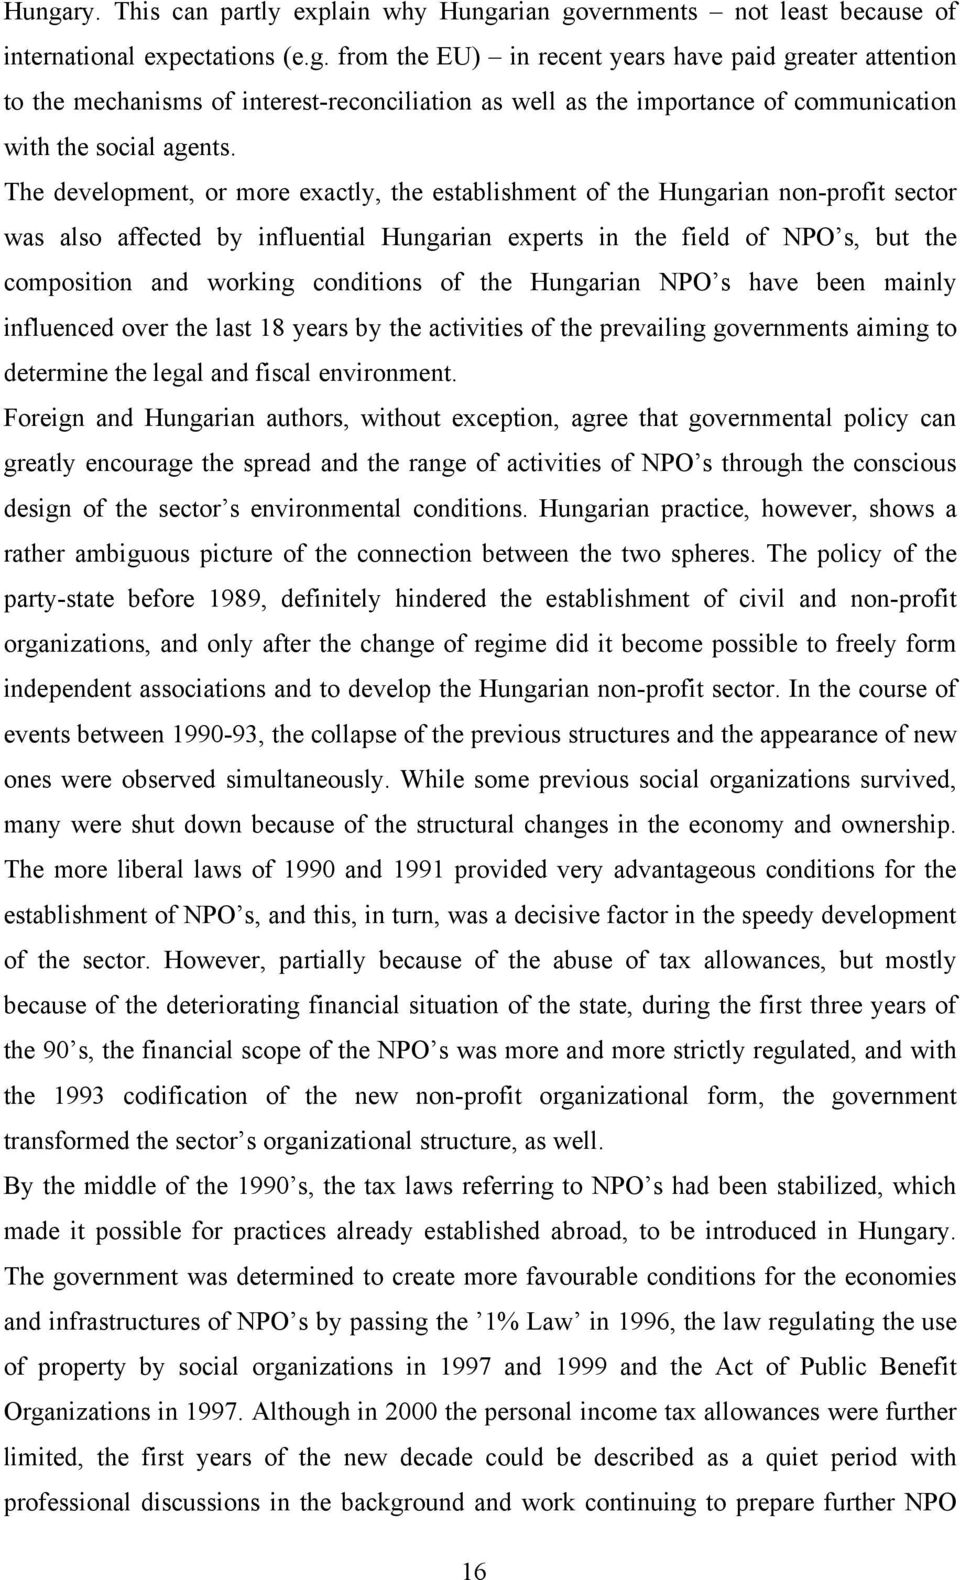 conditions of the Hungarian NPO s have been mainly influenced over the last 18 years by the activities of the prevailing governments aiming to determine the legal and fiscal environment.